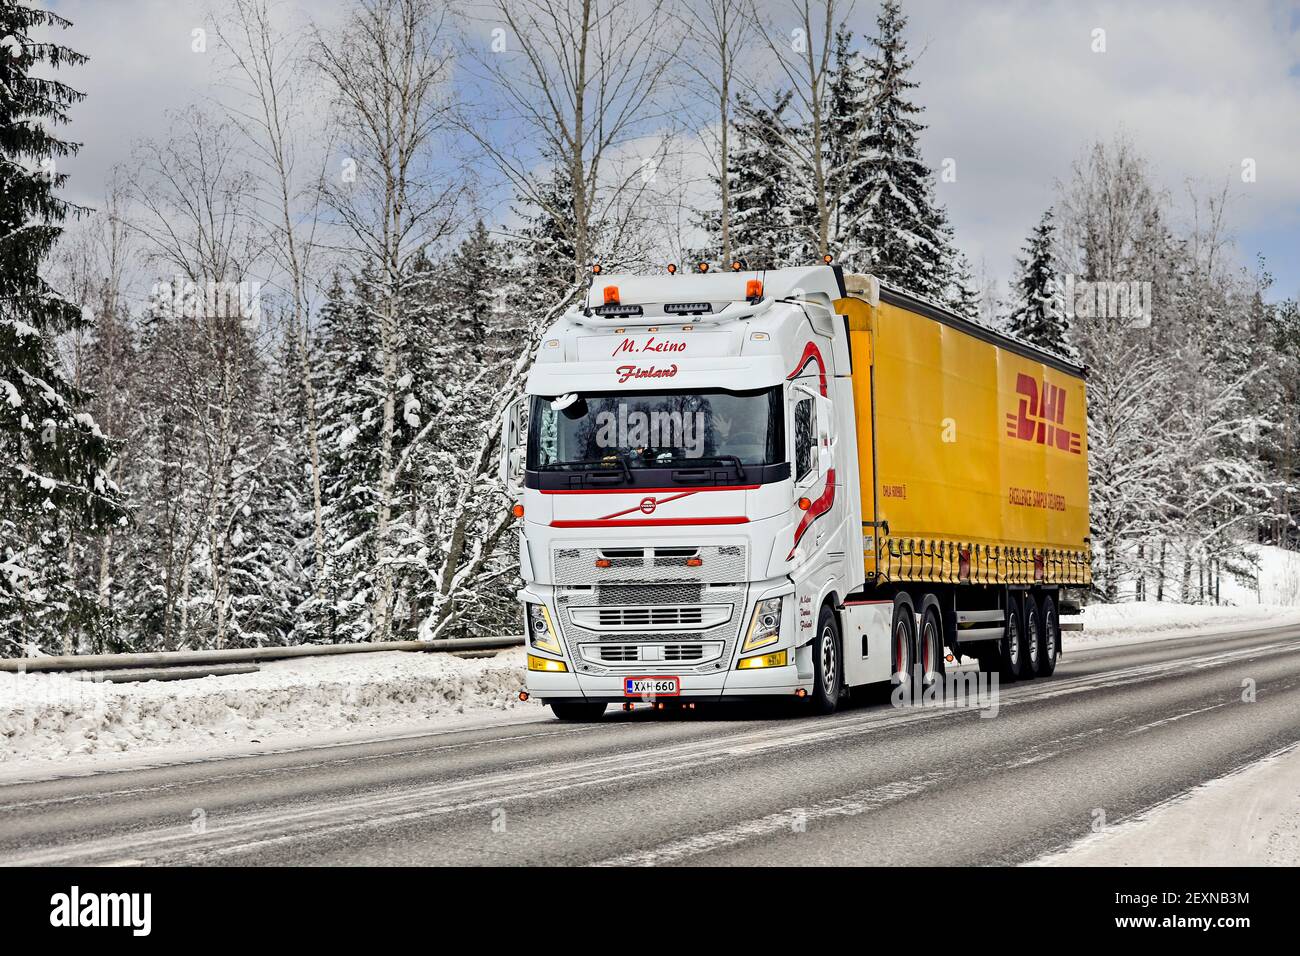 Beautifully customised white Volvo FH truck M. Leino pulls DHL freight trailer on highway 52 on cold day of winter. Salo, Finland. February 12, 2021. Stock Photo